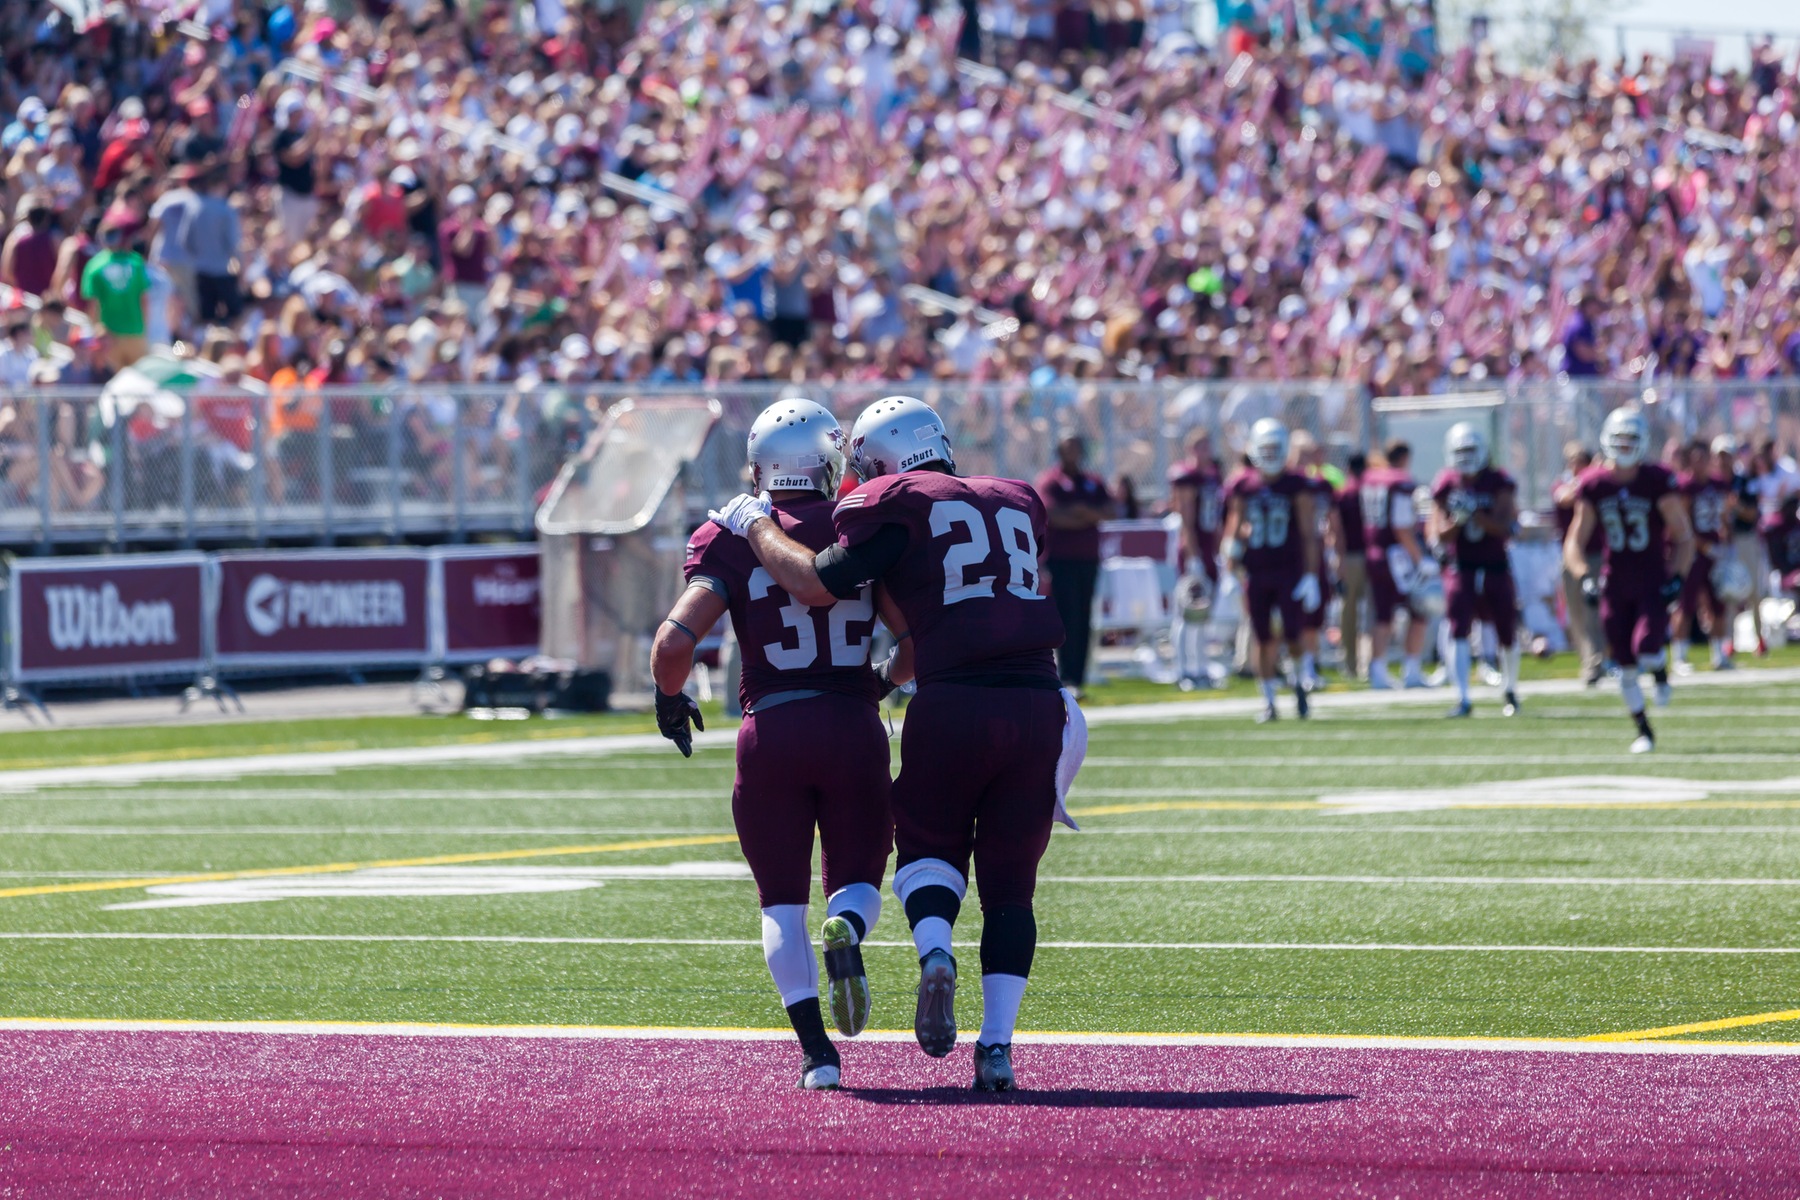 Two football players celebrate in the endzone with grandstand full of fans in the background.